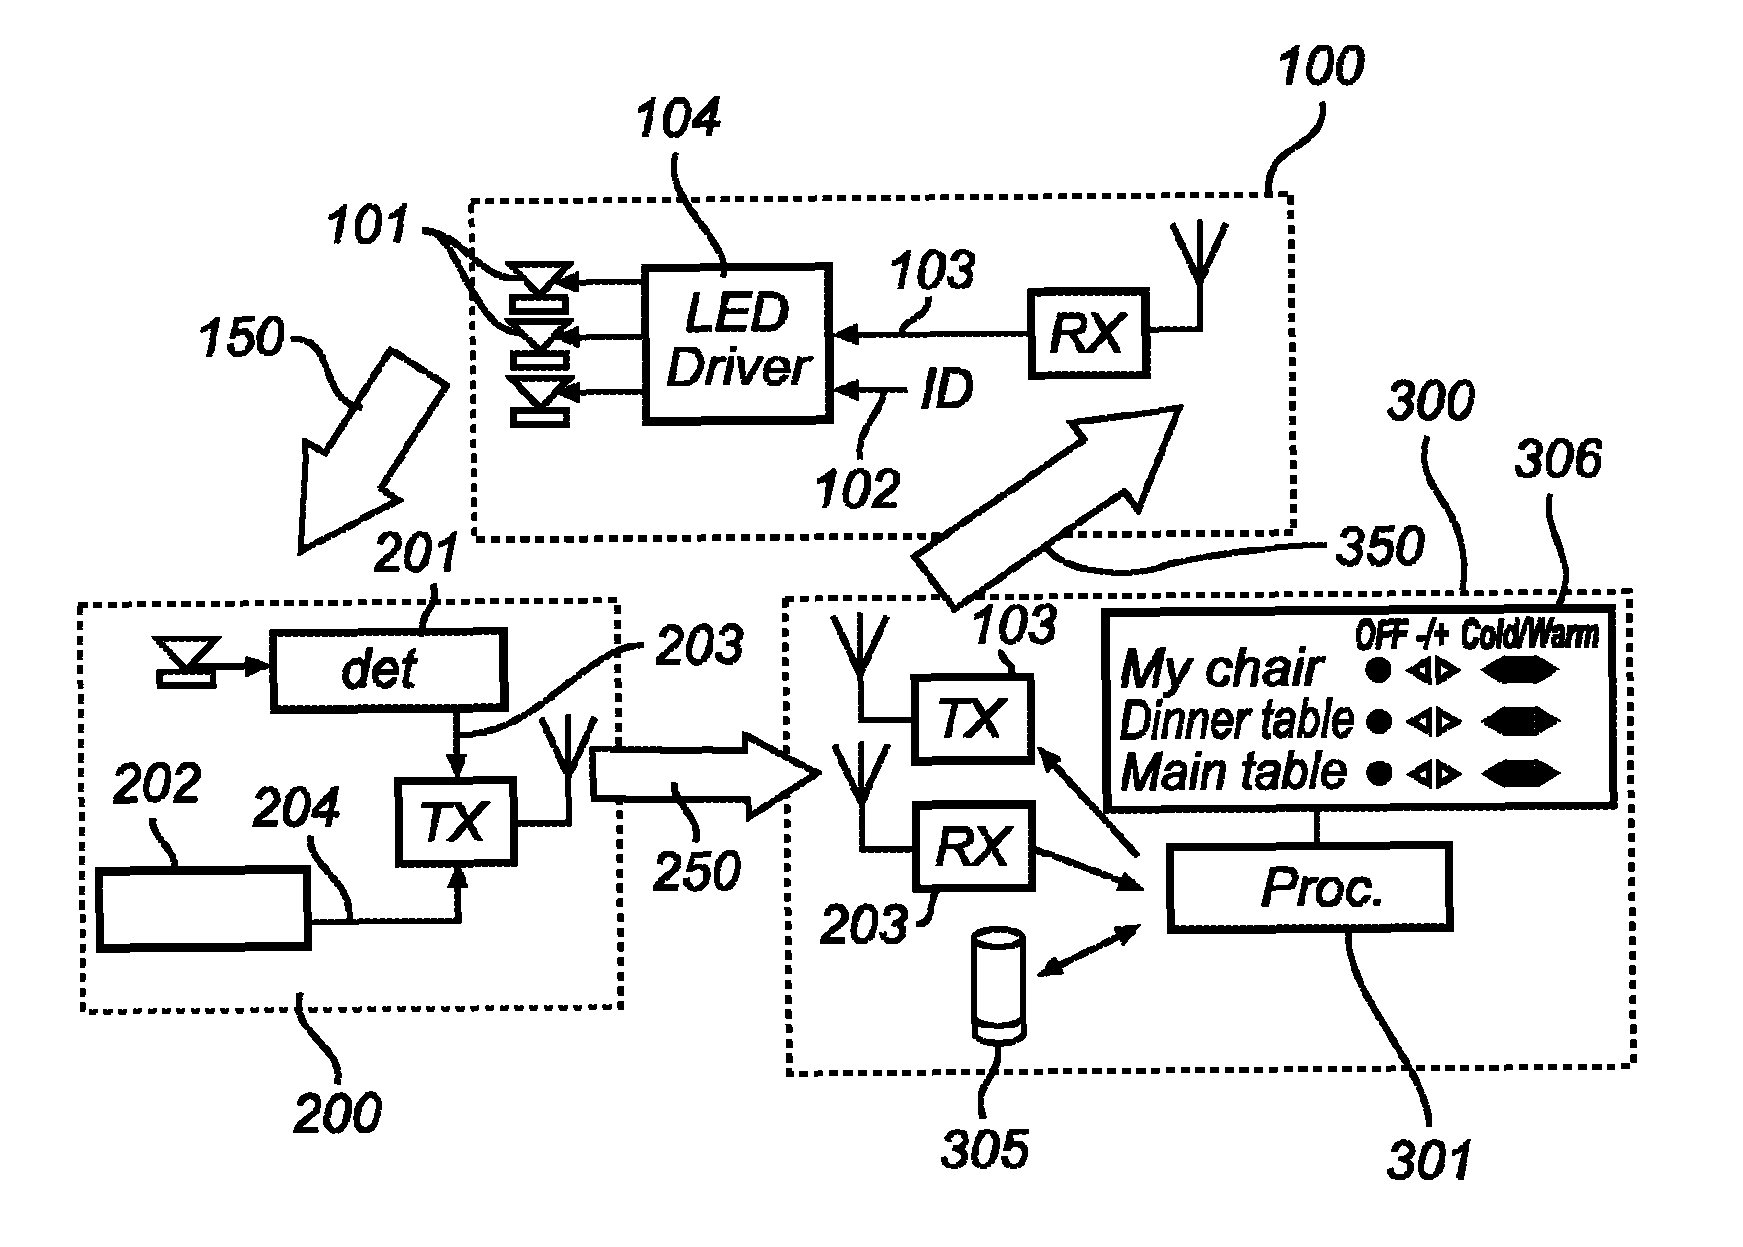 Method and a system for controlling a lighting system